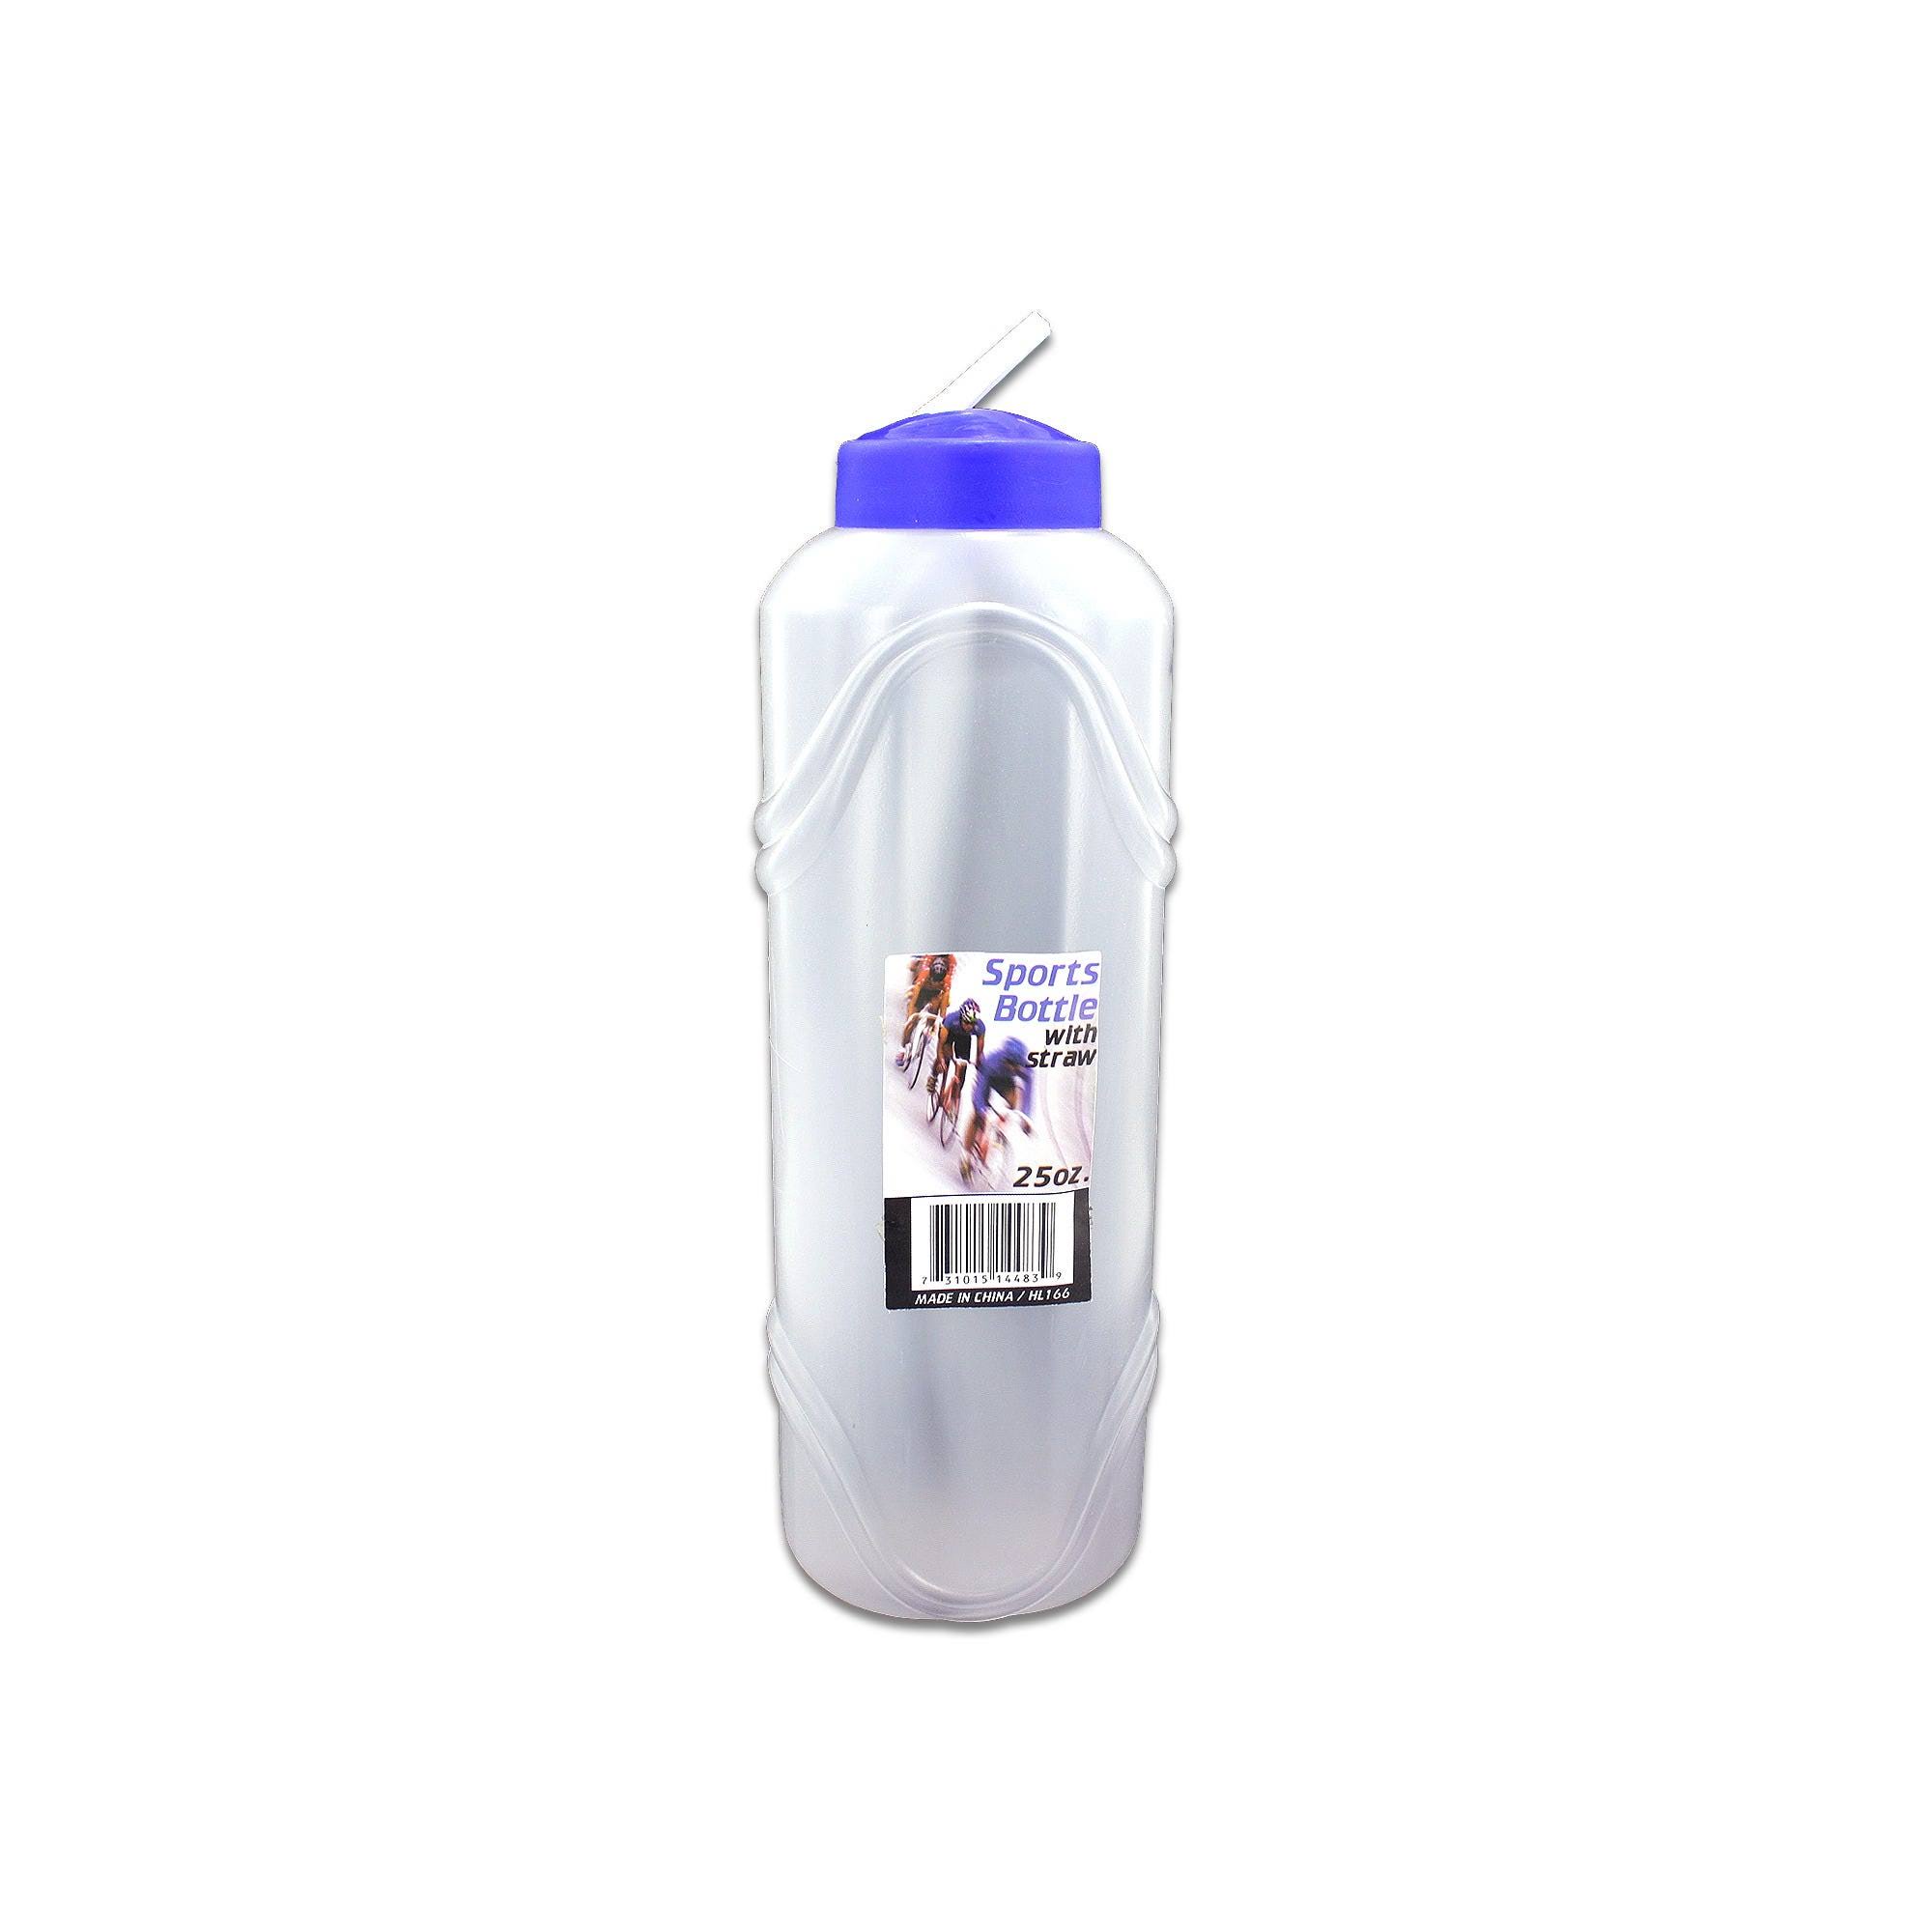 Bulk Buys Water Bottle With Straw - 25oz, Case of 24